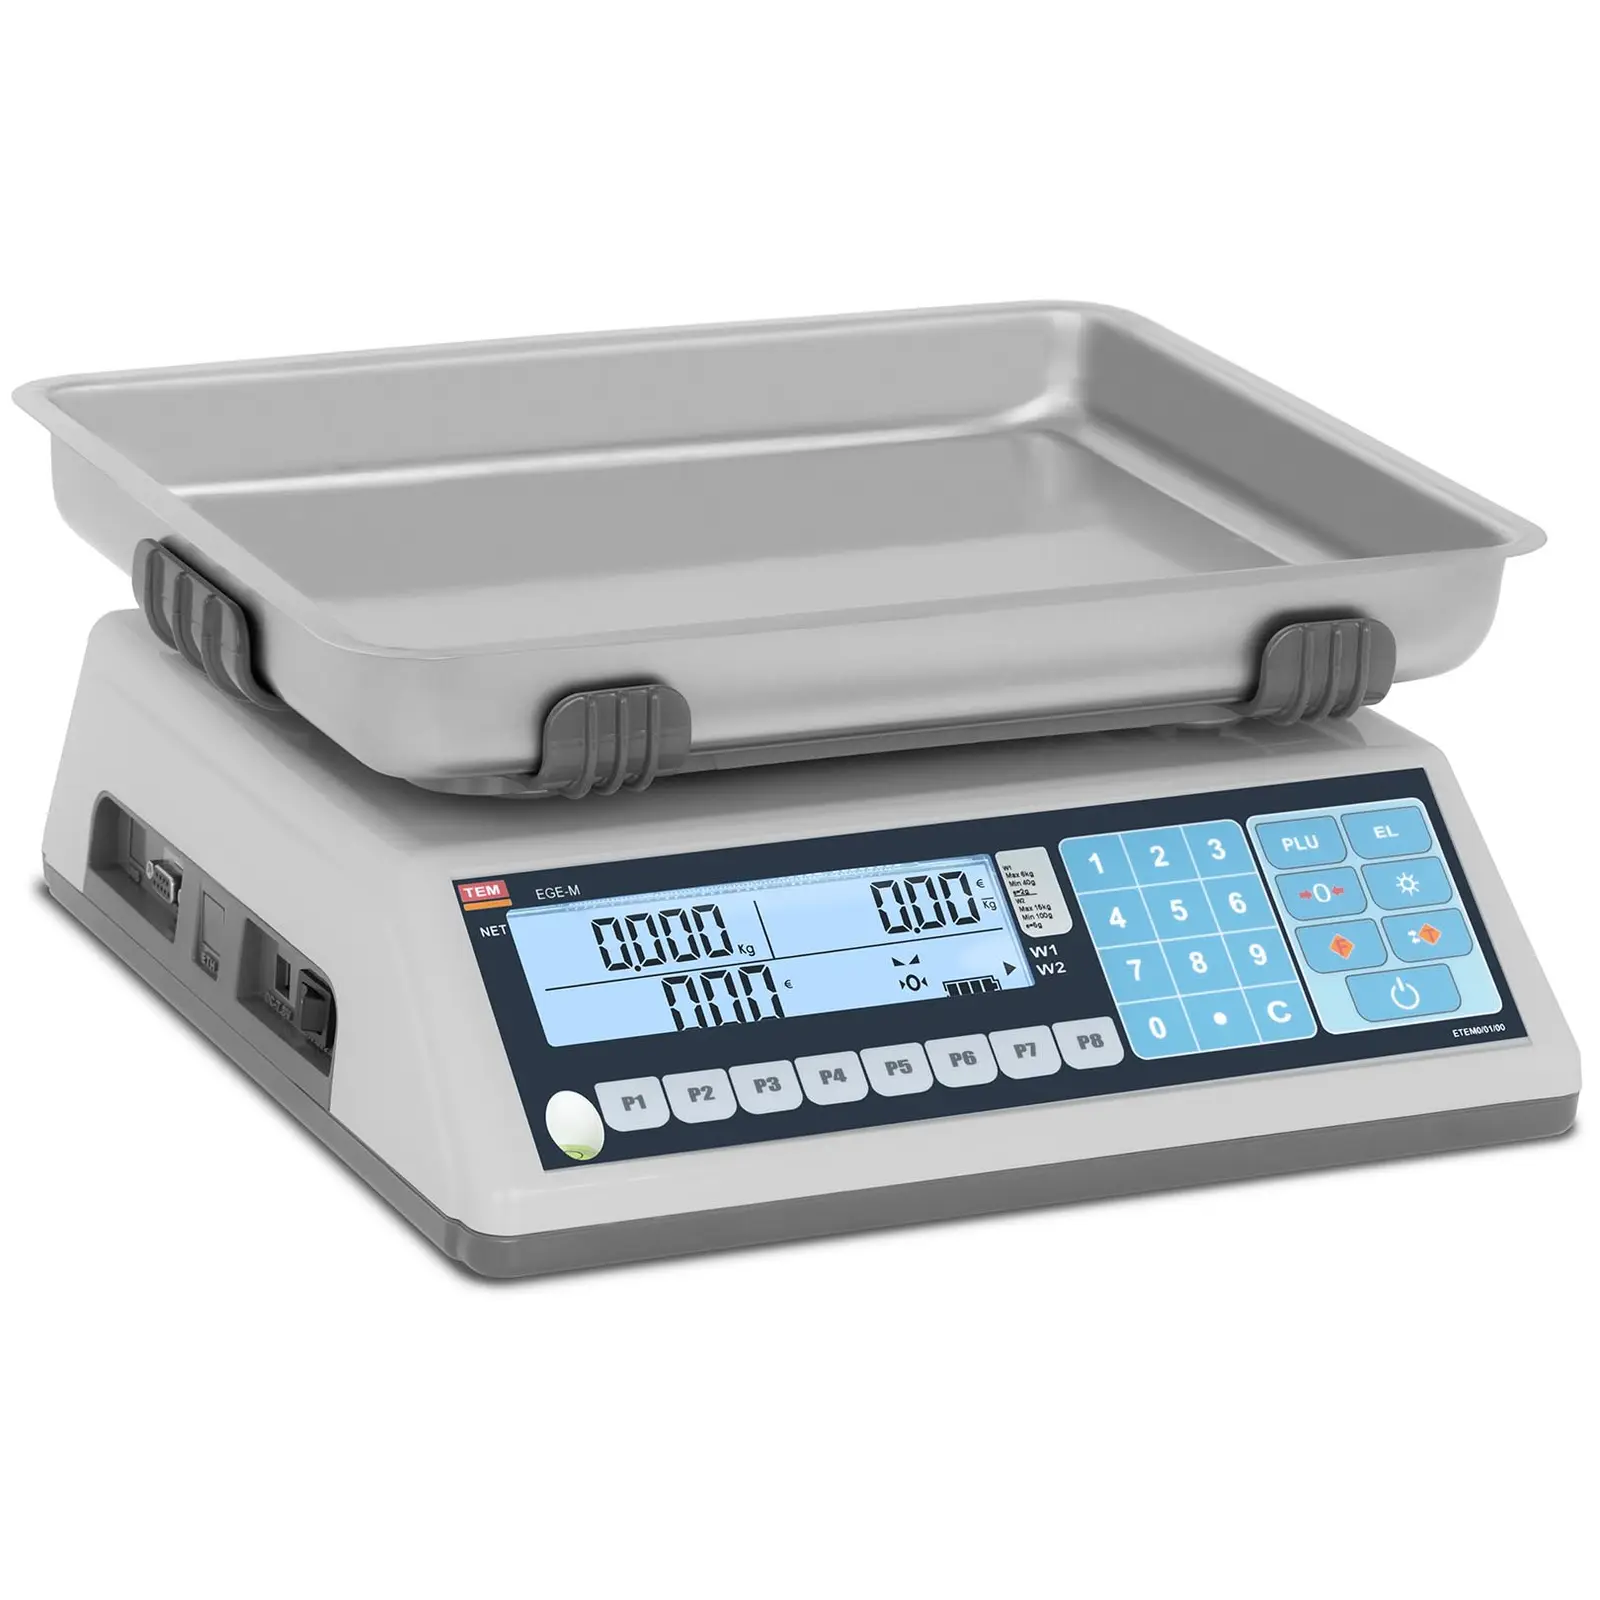 Price-Computing Scale - calibrated - 15 kg / 5 g - dual LCD